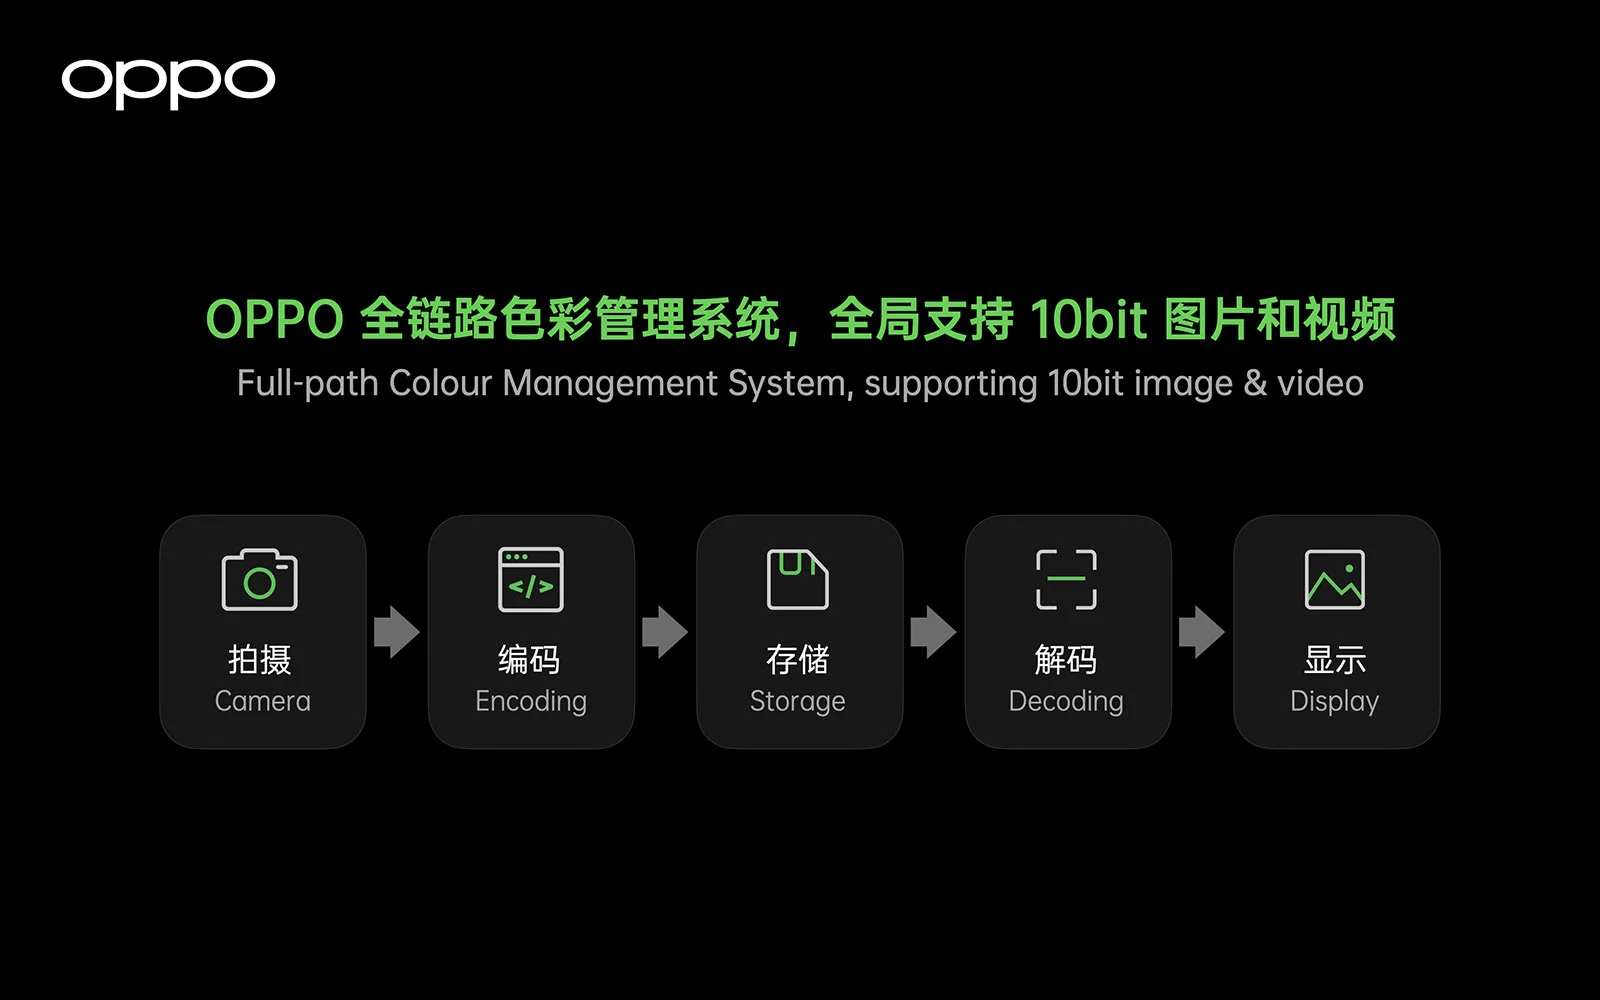 Oppo Full-path Color Management System supports 10-bit image and video. This will be part of the upcoming Oppo Find X3 series smartphones.